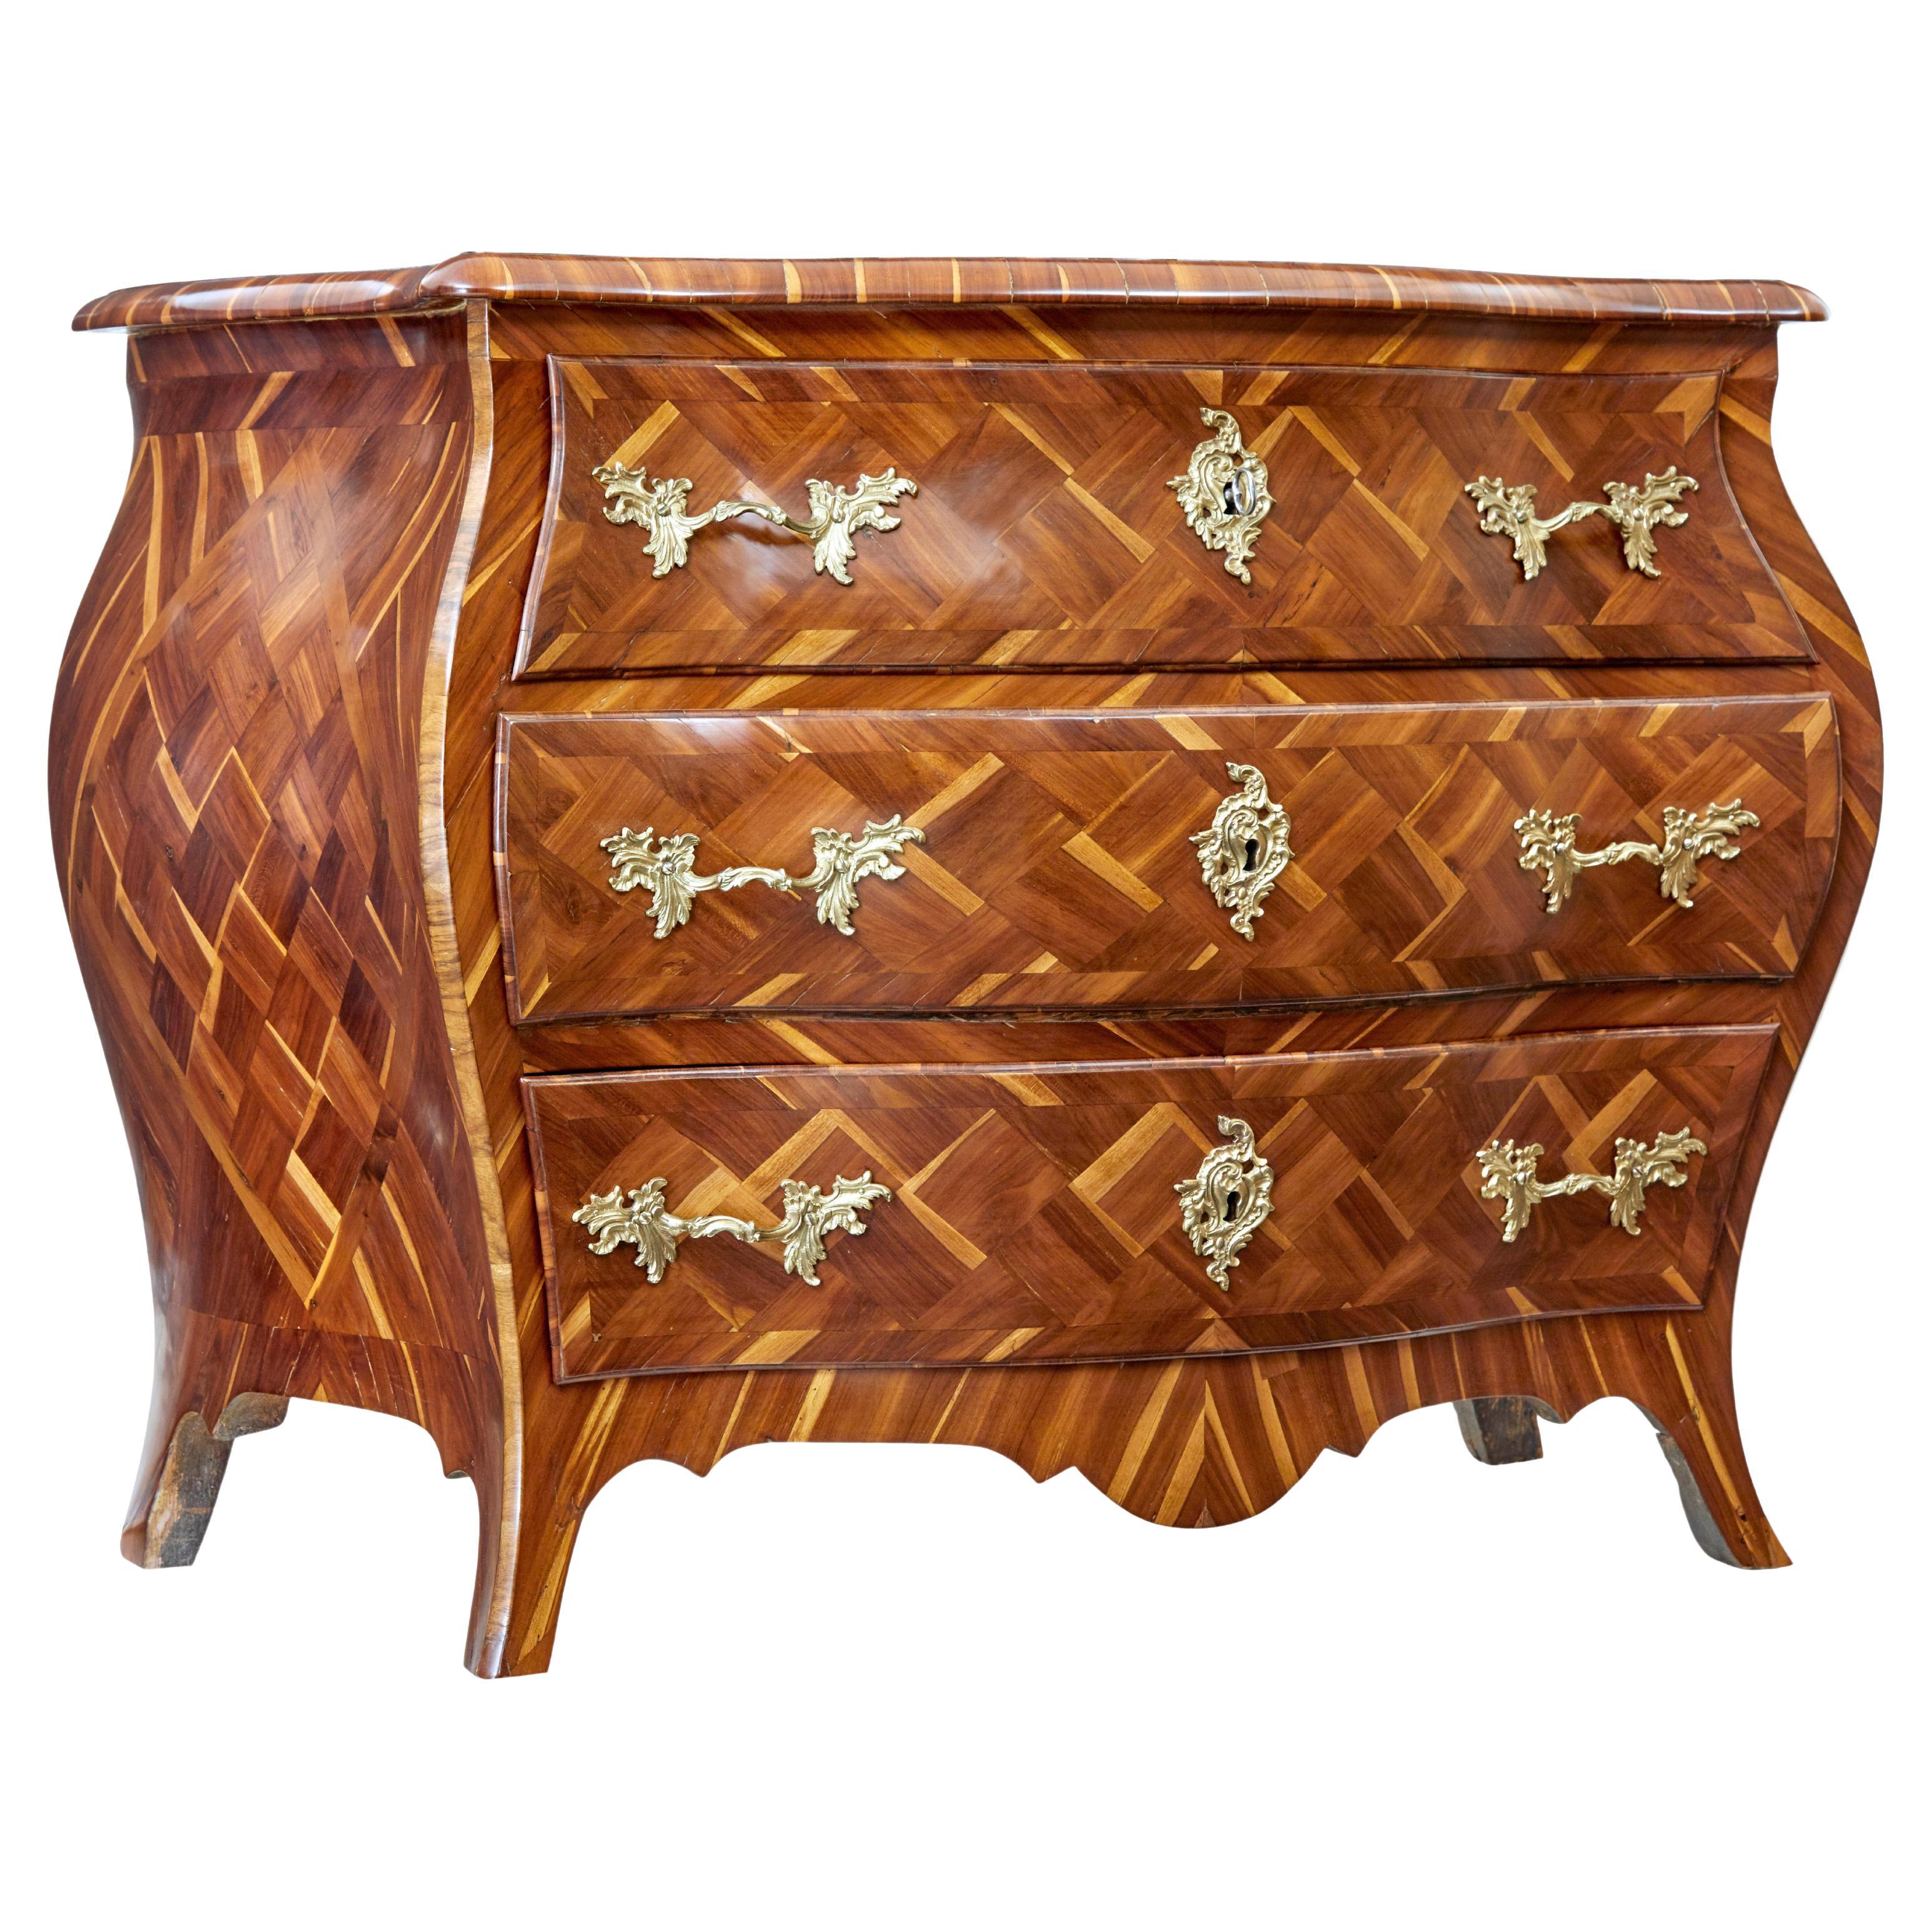 Early 18th Century rococo inlaid plum bombe chest of drawers For Sale